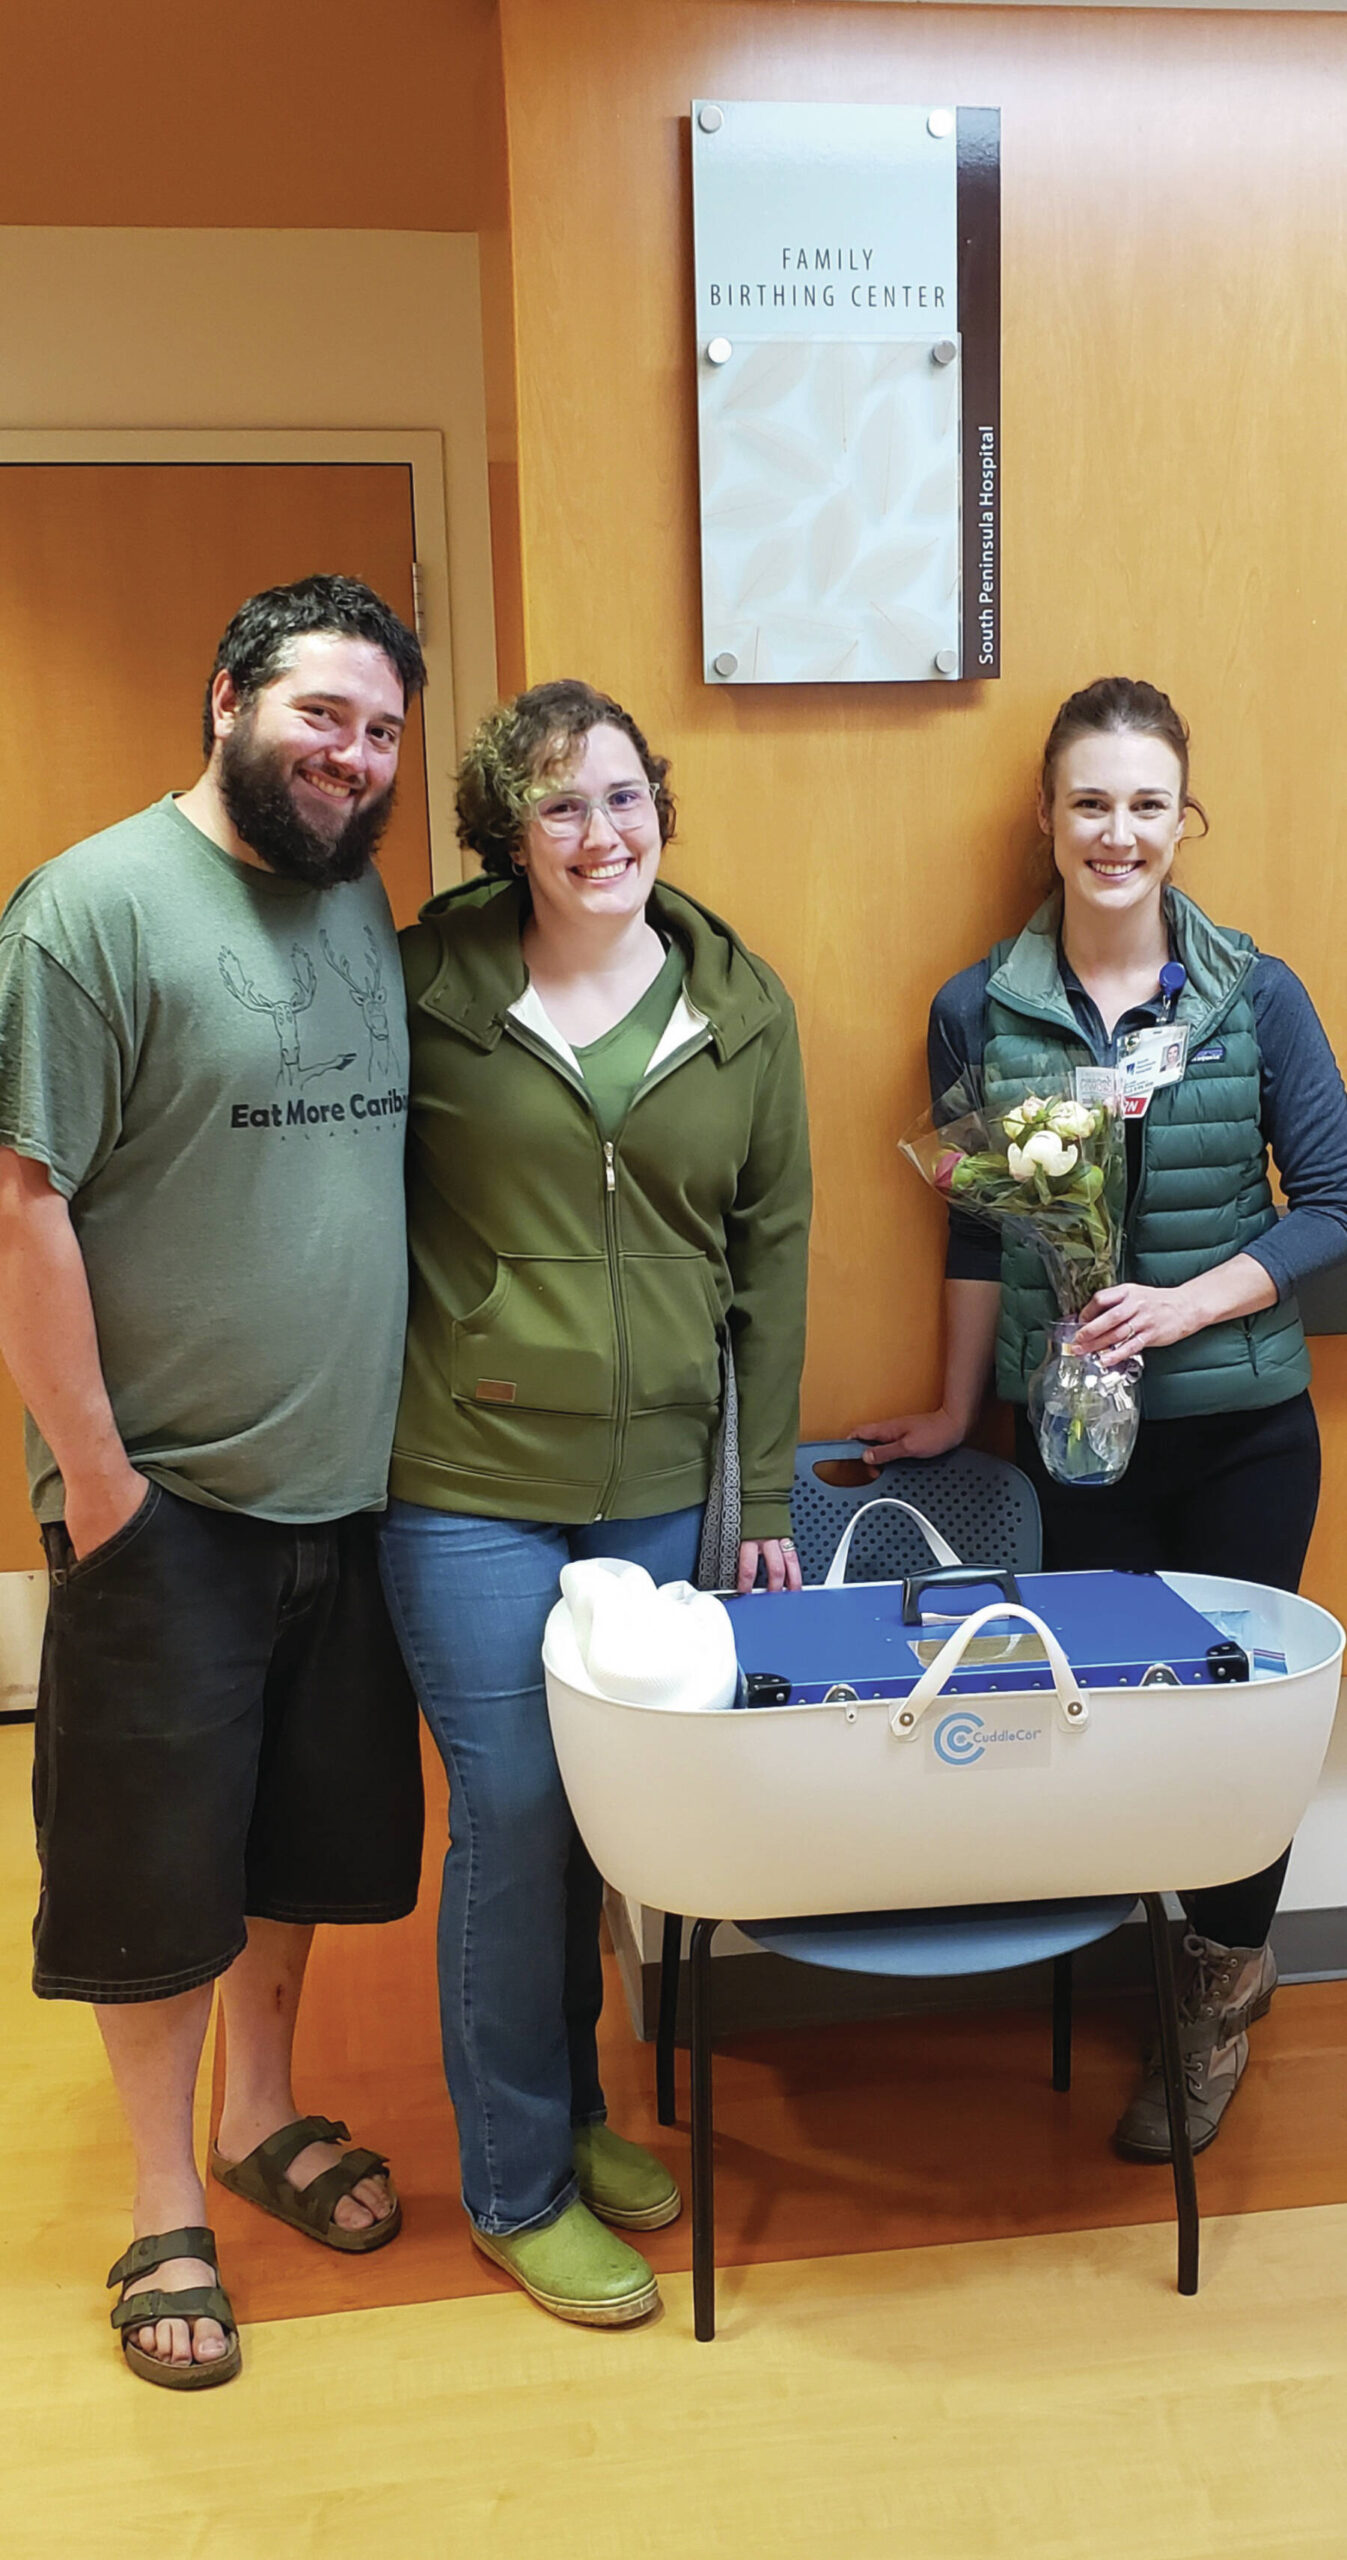 Michael and Jennifer Redding with South Peninsula Hospital's OB/Family Birth Center Director Joelle Burdick and their contribution of a CuddleCot in Homer, Alaska on July 15.  Photo provided by Derotha Ferraro.